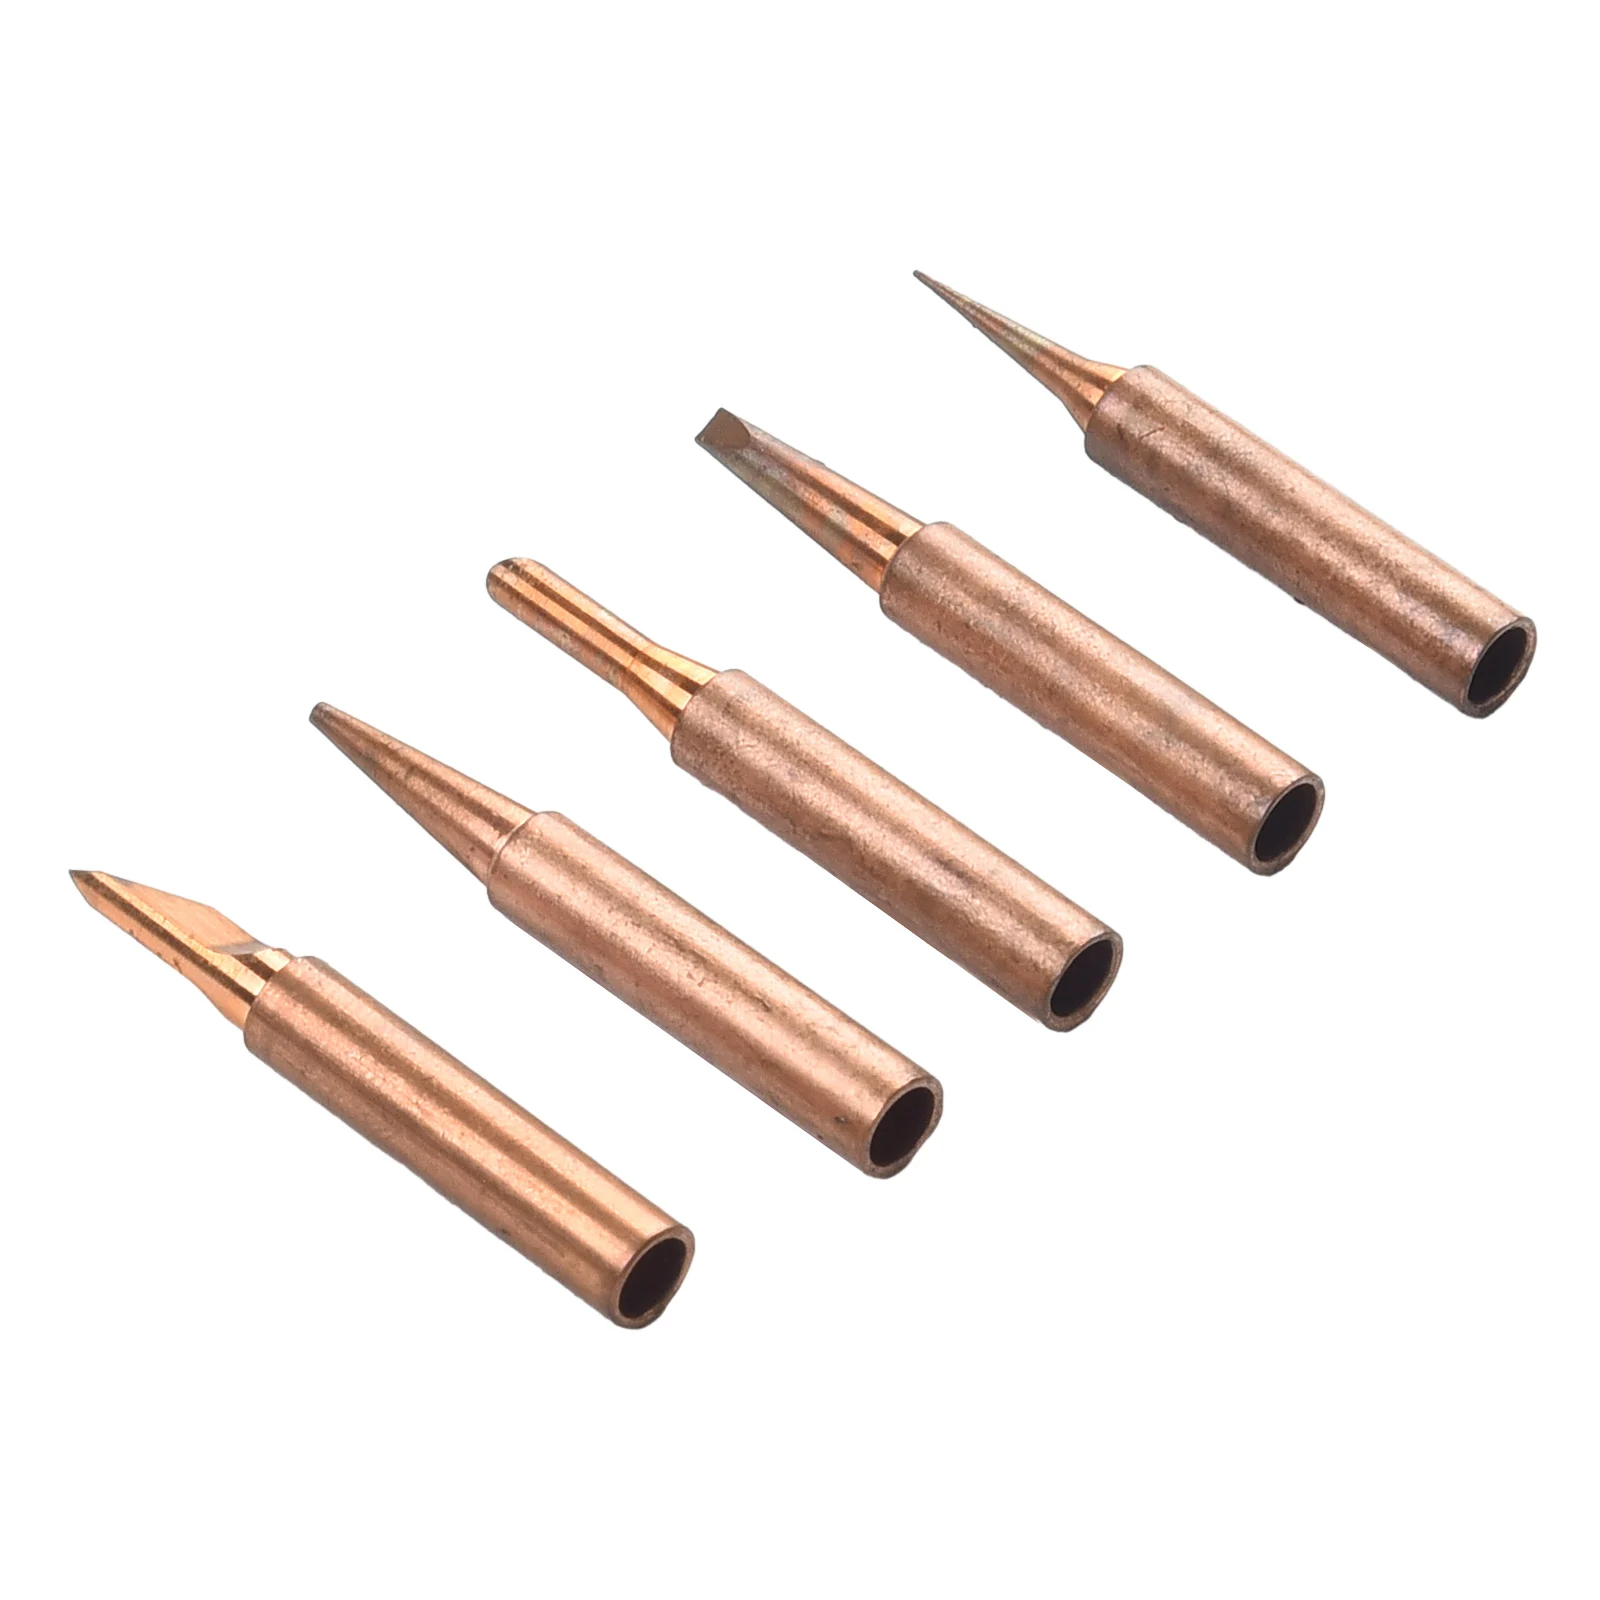 Brand New Durable High Quality Useful Practical Soldering Iron Tips Professional Set Fittings Gold I+B+K+3C+2.4D